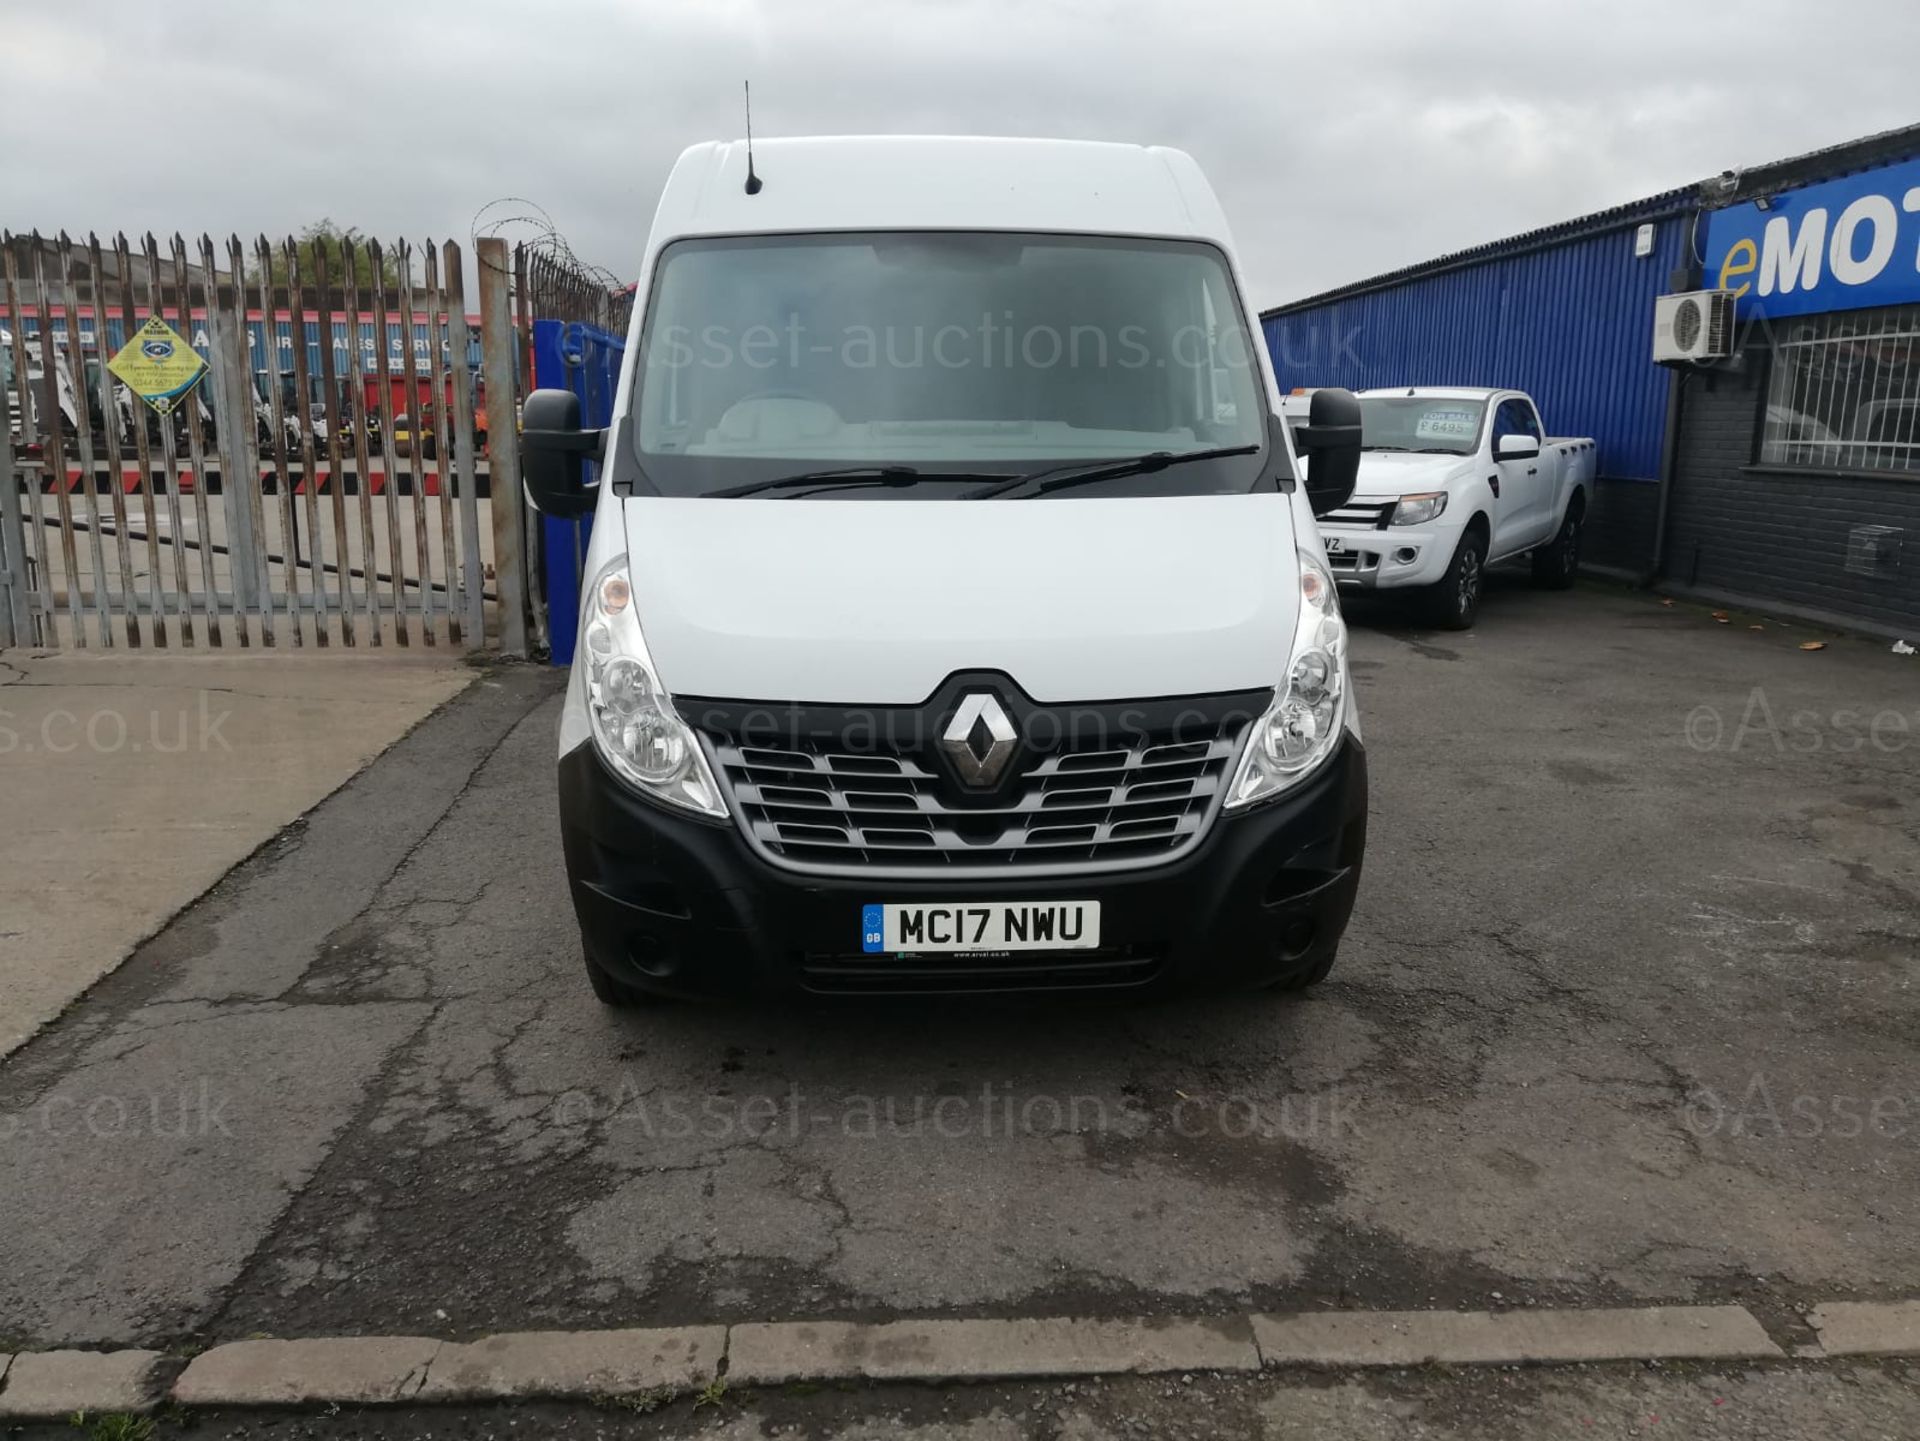 2017/17 RENAULT MASTER LM35 BUSINESS DCI L3H2 WHITE PANEL VAN, 106K MILES WITH SERVICE HISTORY - Image 2 of 9